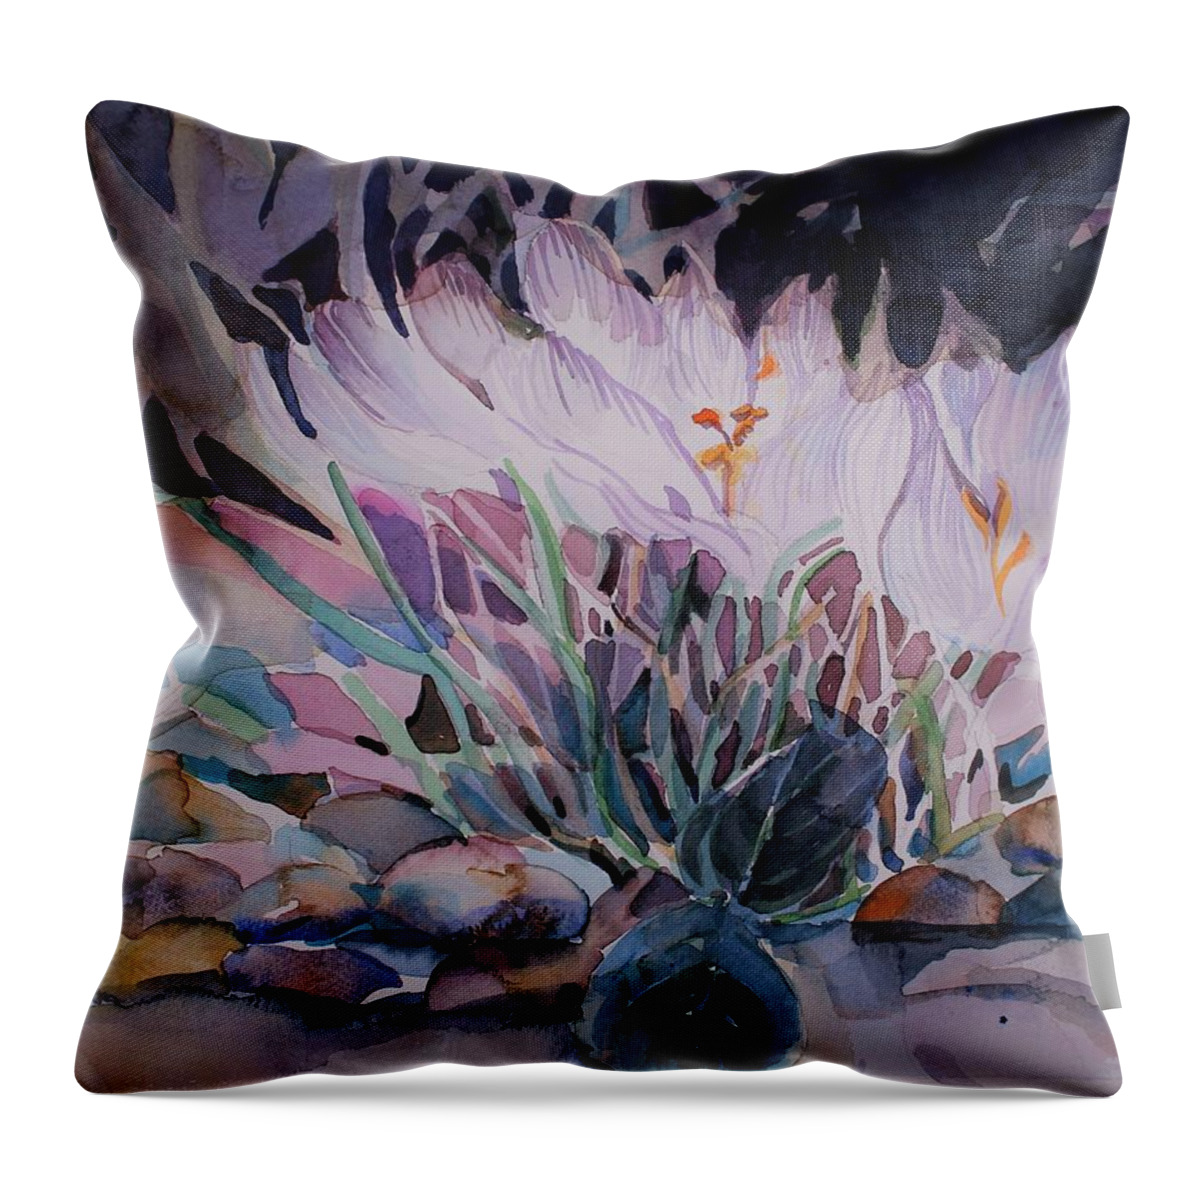 Crocuses Throw Pillow featuring the painting Crocuses by Mindy Newman